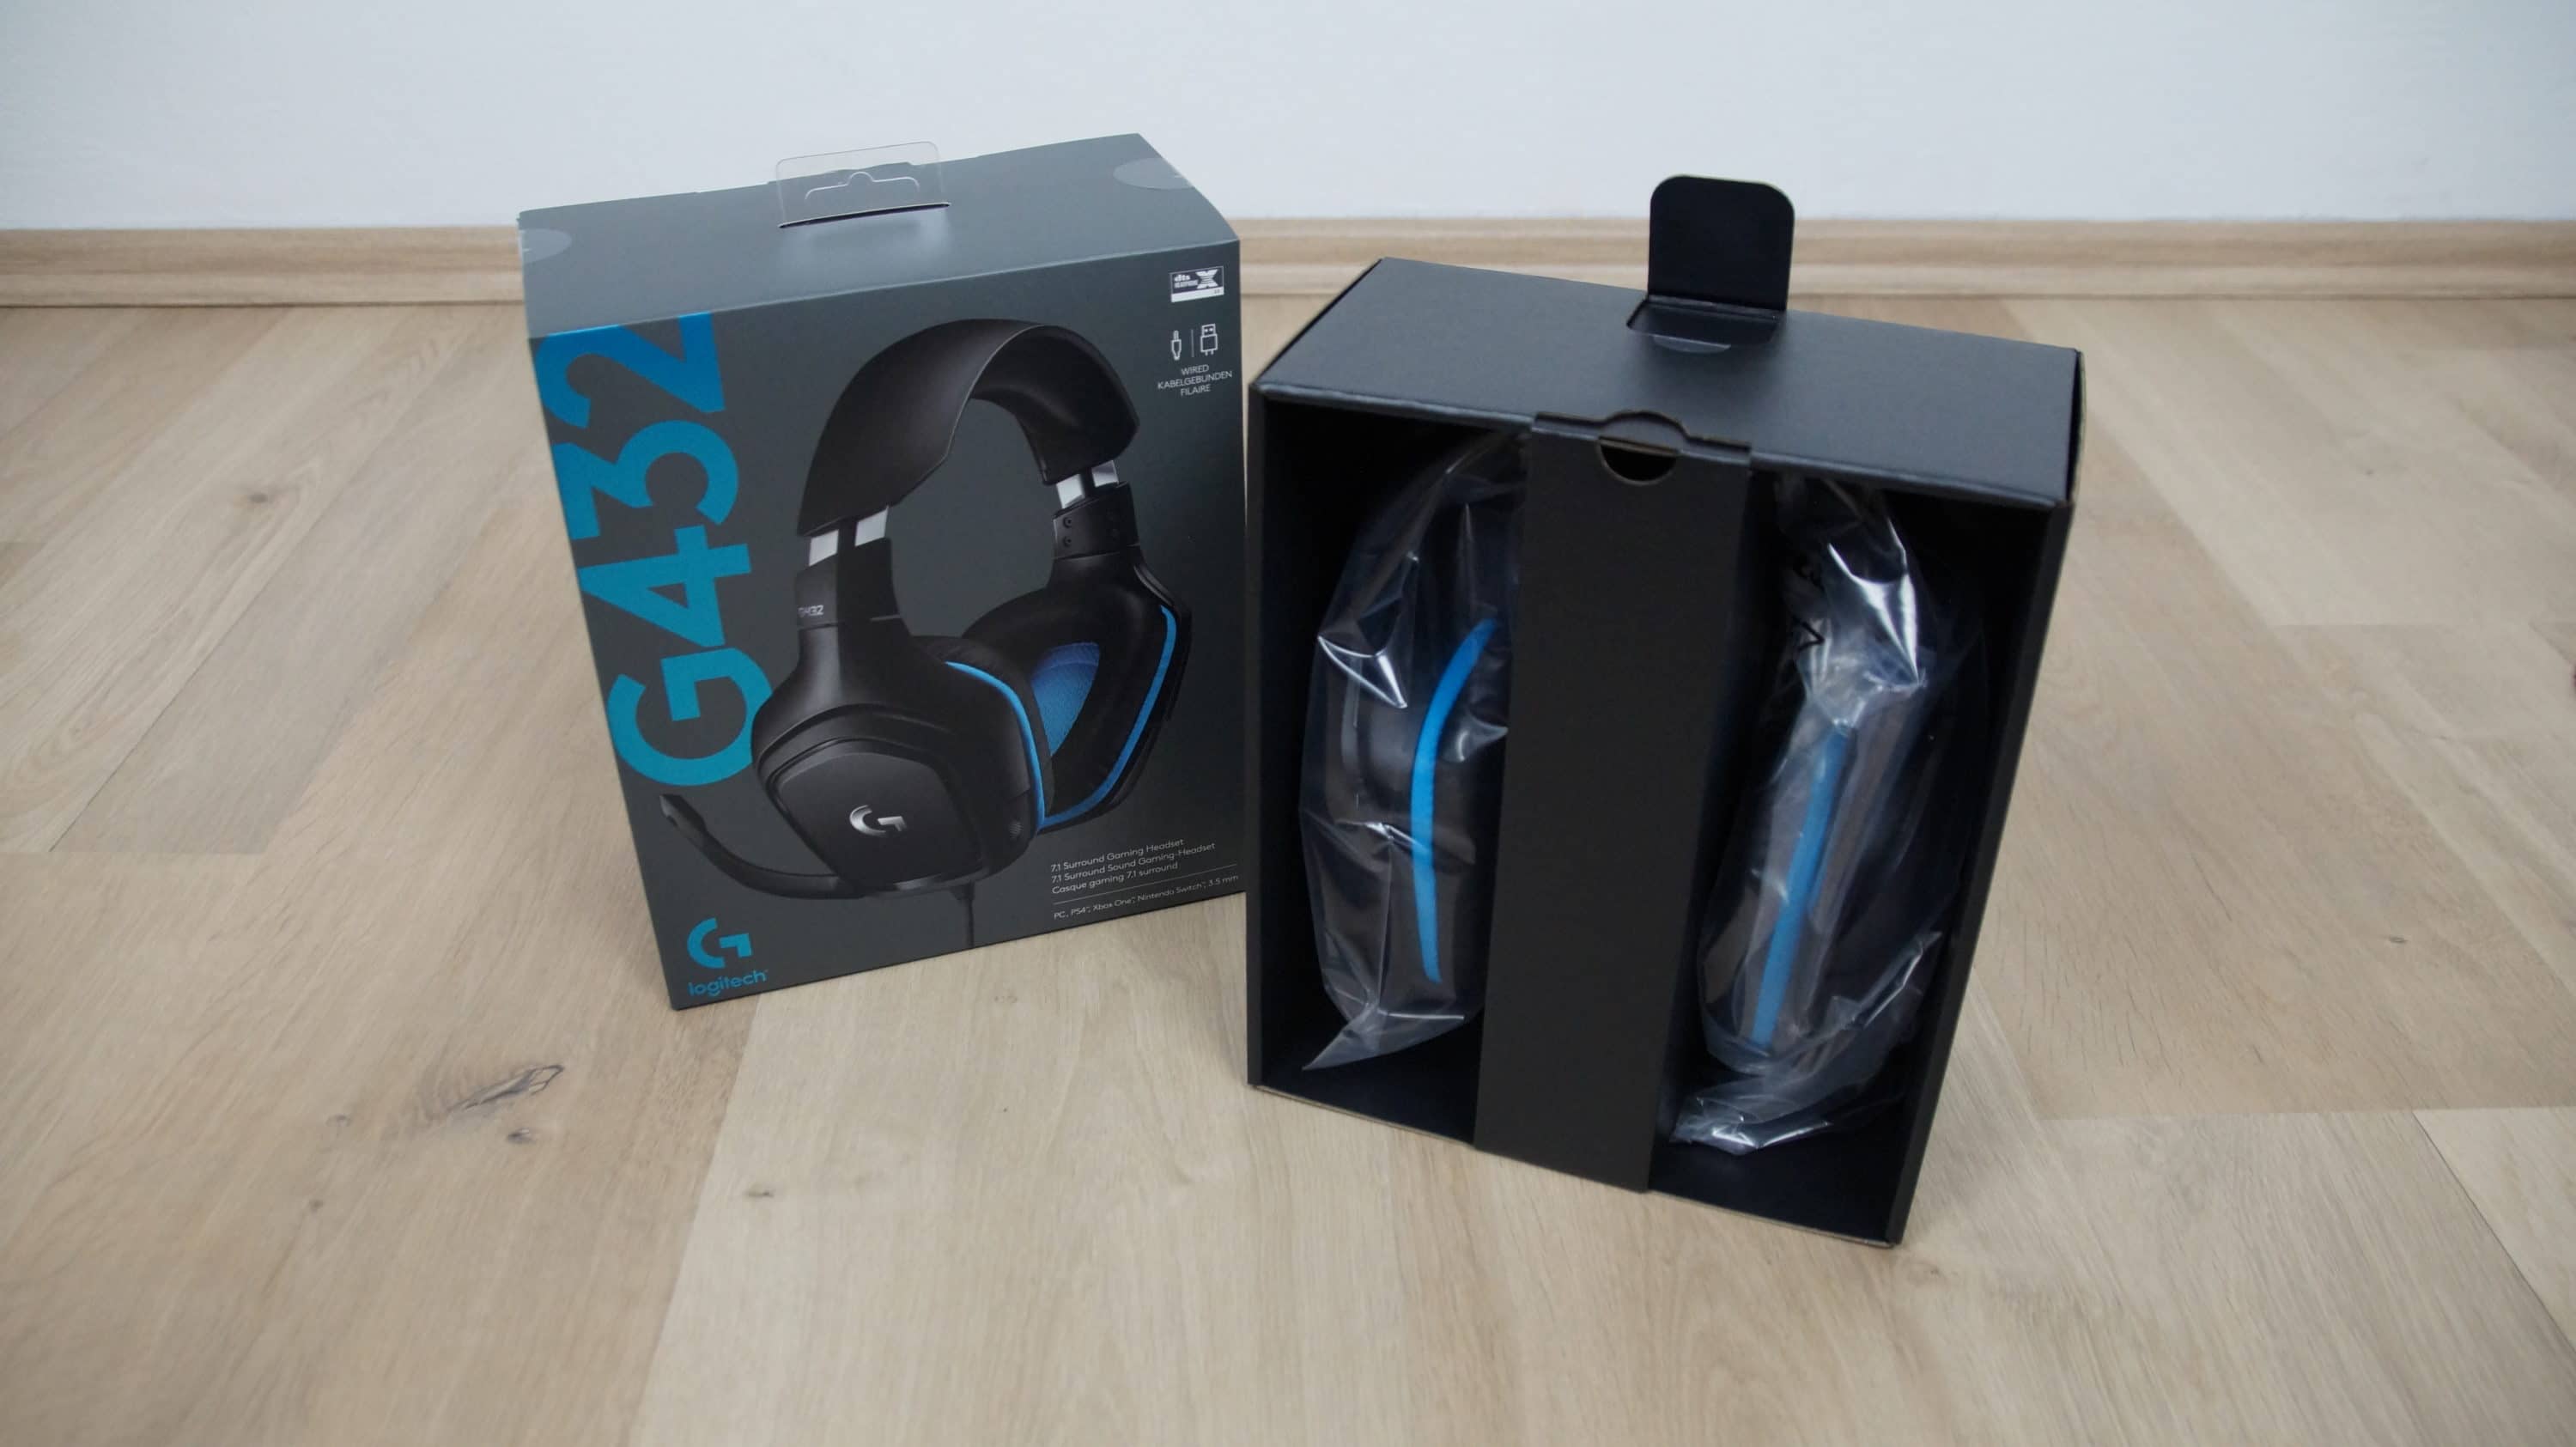 Logitech G432 Review - Good mid-tier headset marred by old design